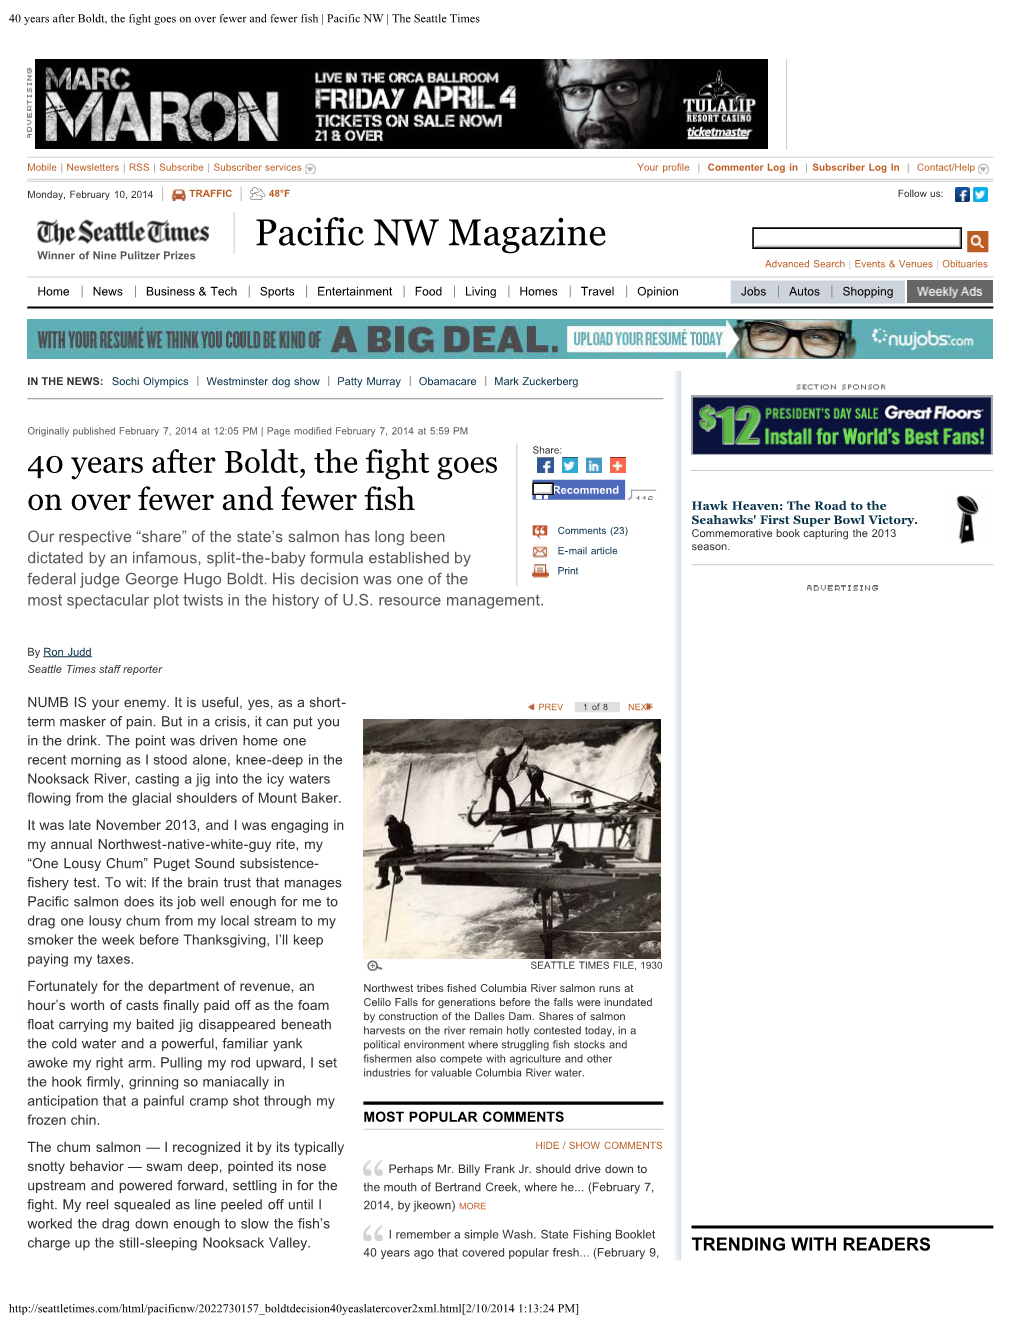 40 Years After Boldt, the Fight Goes on Over Fewer and Fewer Fish | Pacific NW | the Seattle Times